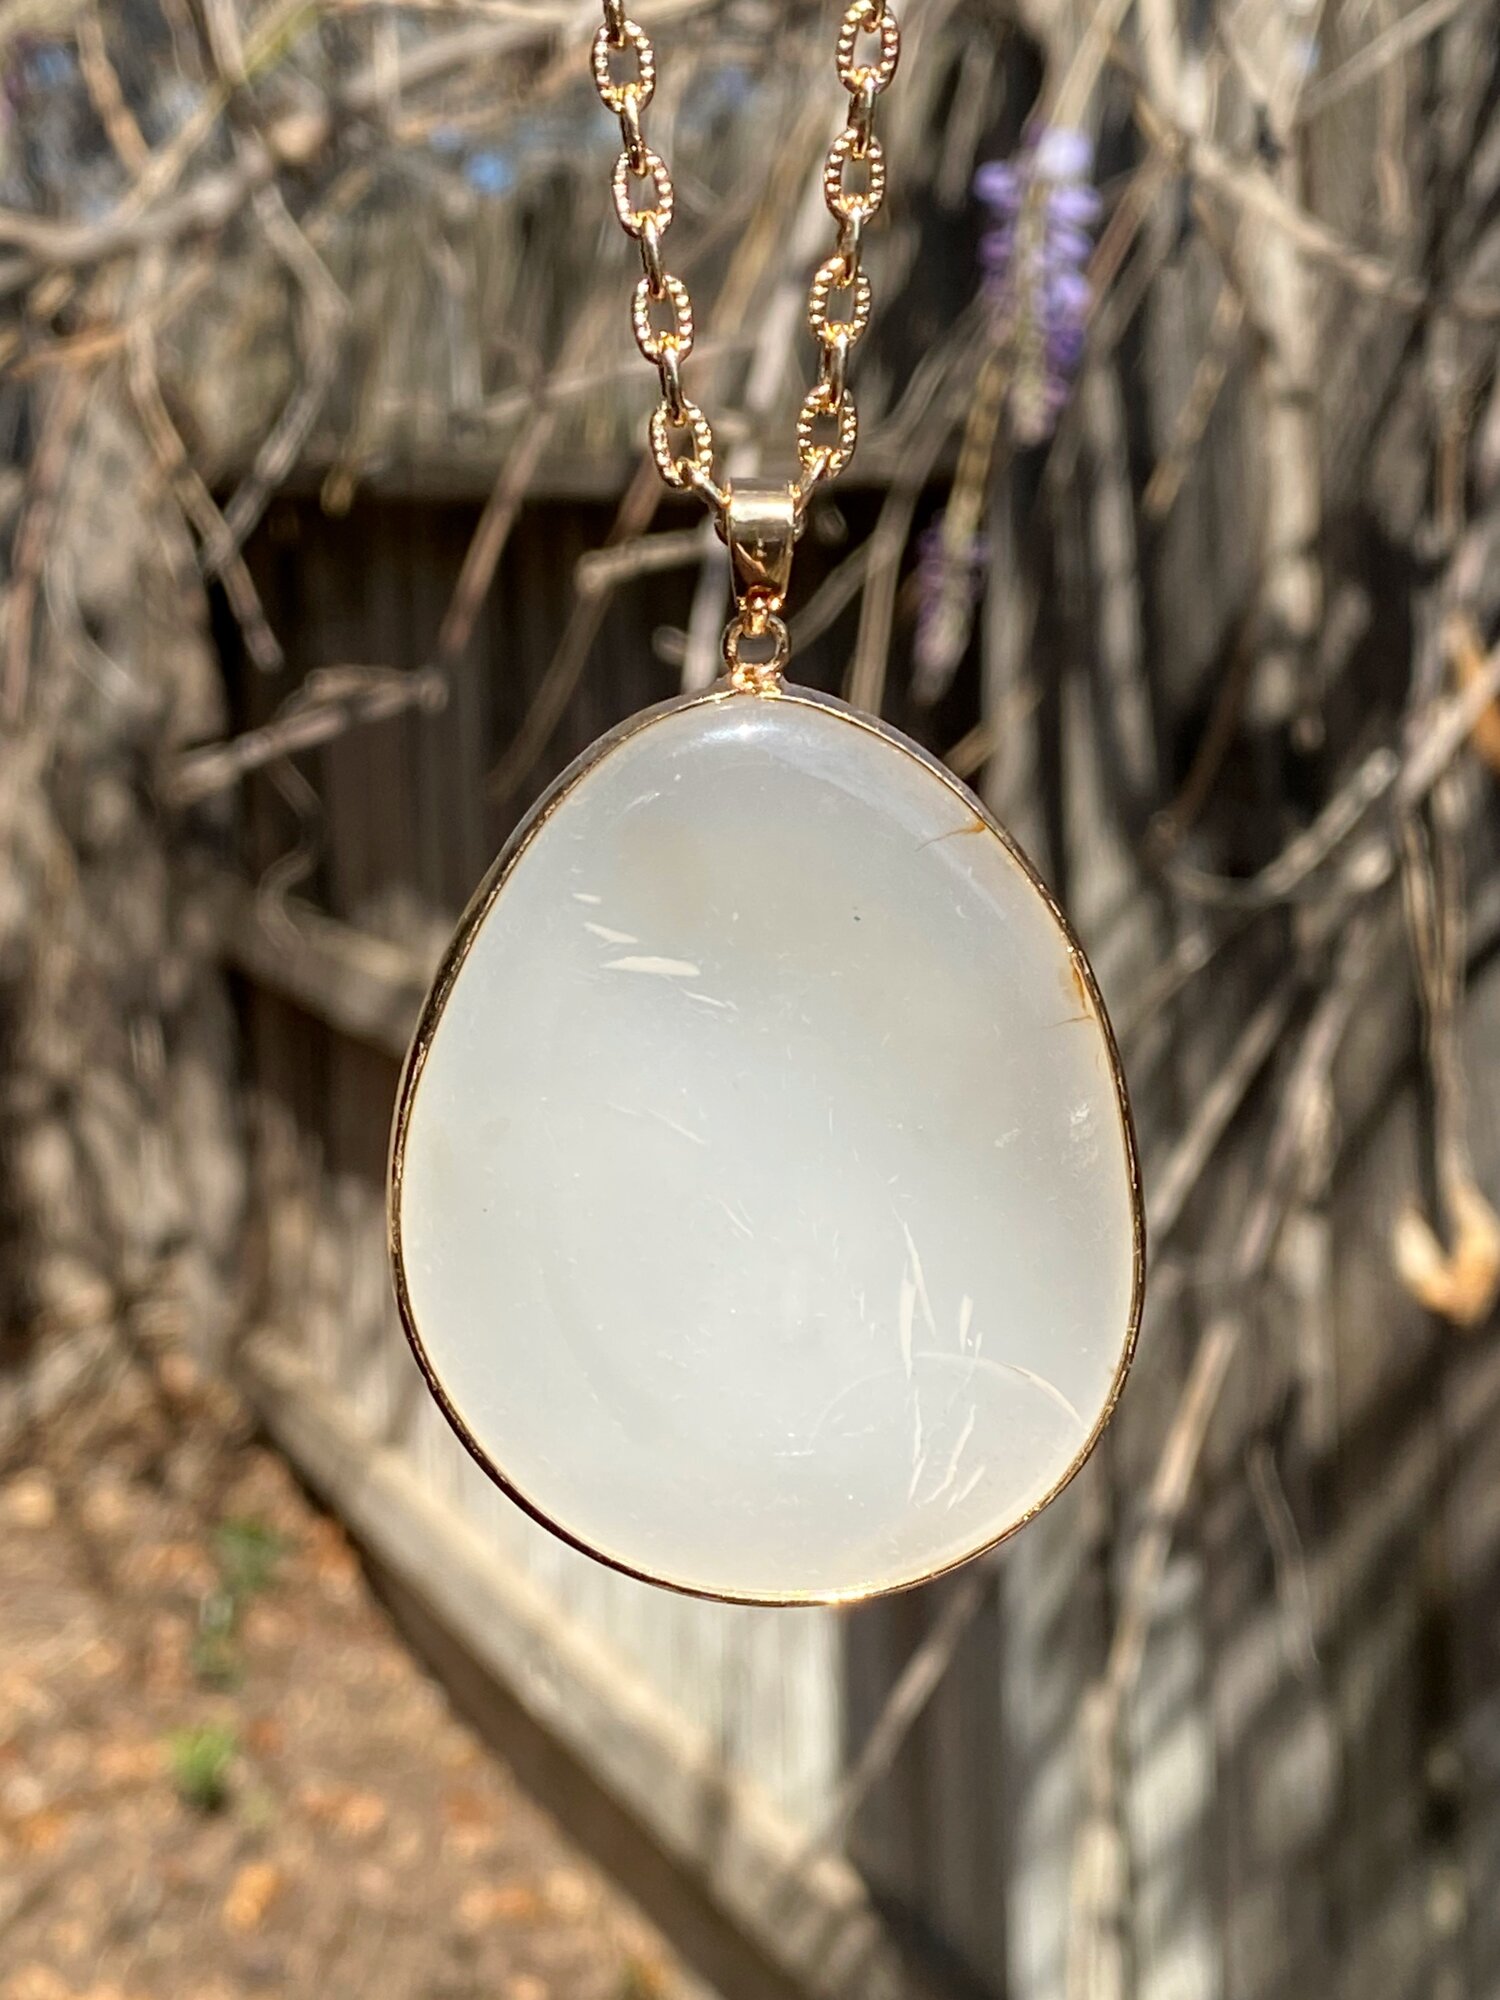 Necklace Supplies  NC-072 Natural Gemstone Jewelry Finding Irregular White Stalactite Natural Stone Slice Charm with 24K Gold Plated Rim